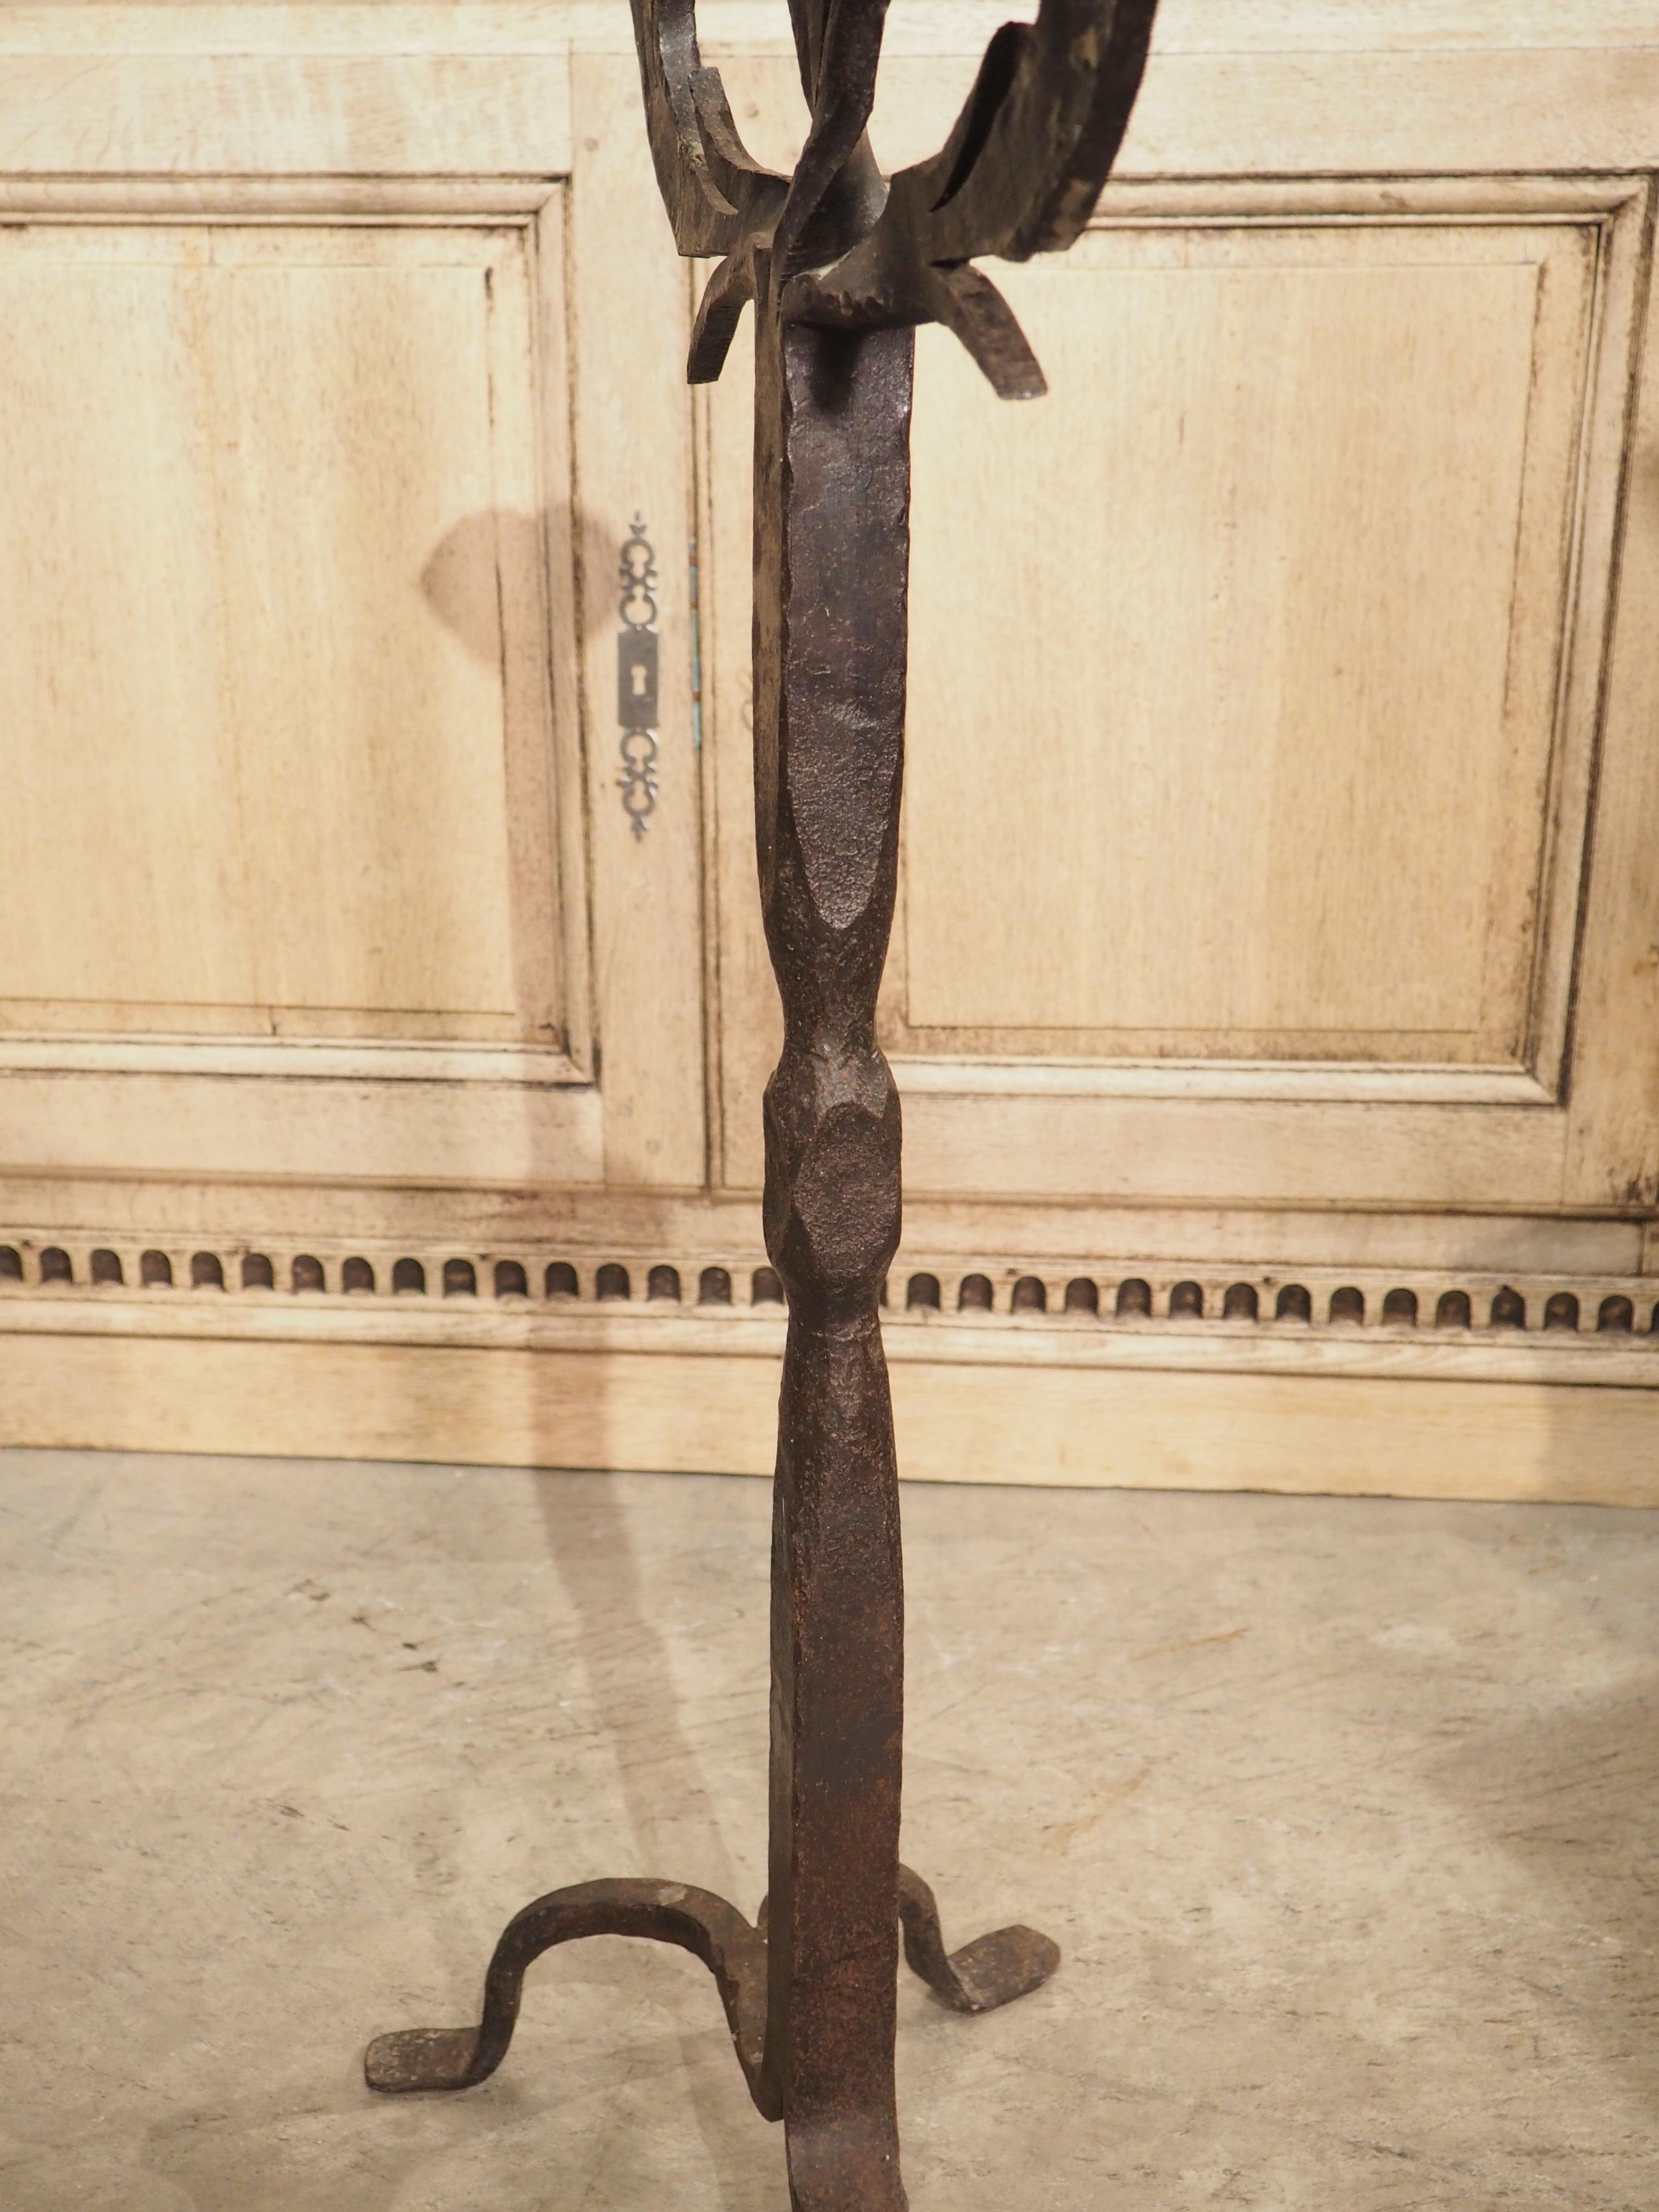 Forged in Spain, circa 1900, this iron candelabra torchere has three arms embellished with angular protrusions, in the form of stylized leaves emanating from a plant stem. Each arm is topped with undulating circular bobeches and a geometric pricket,